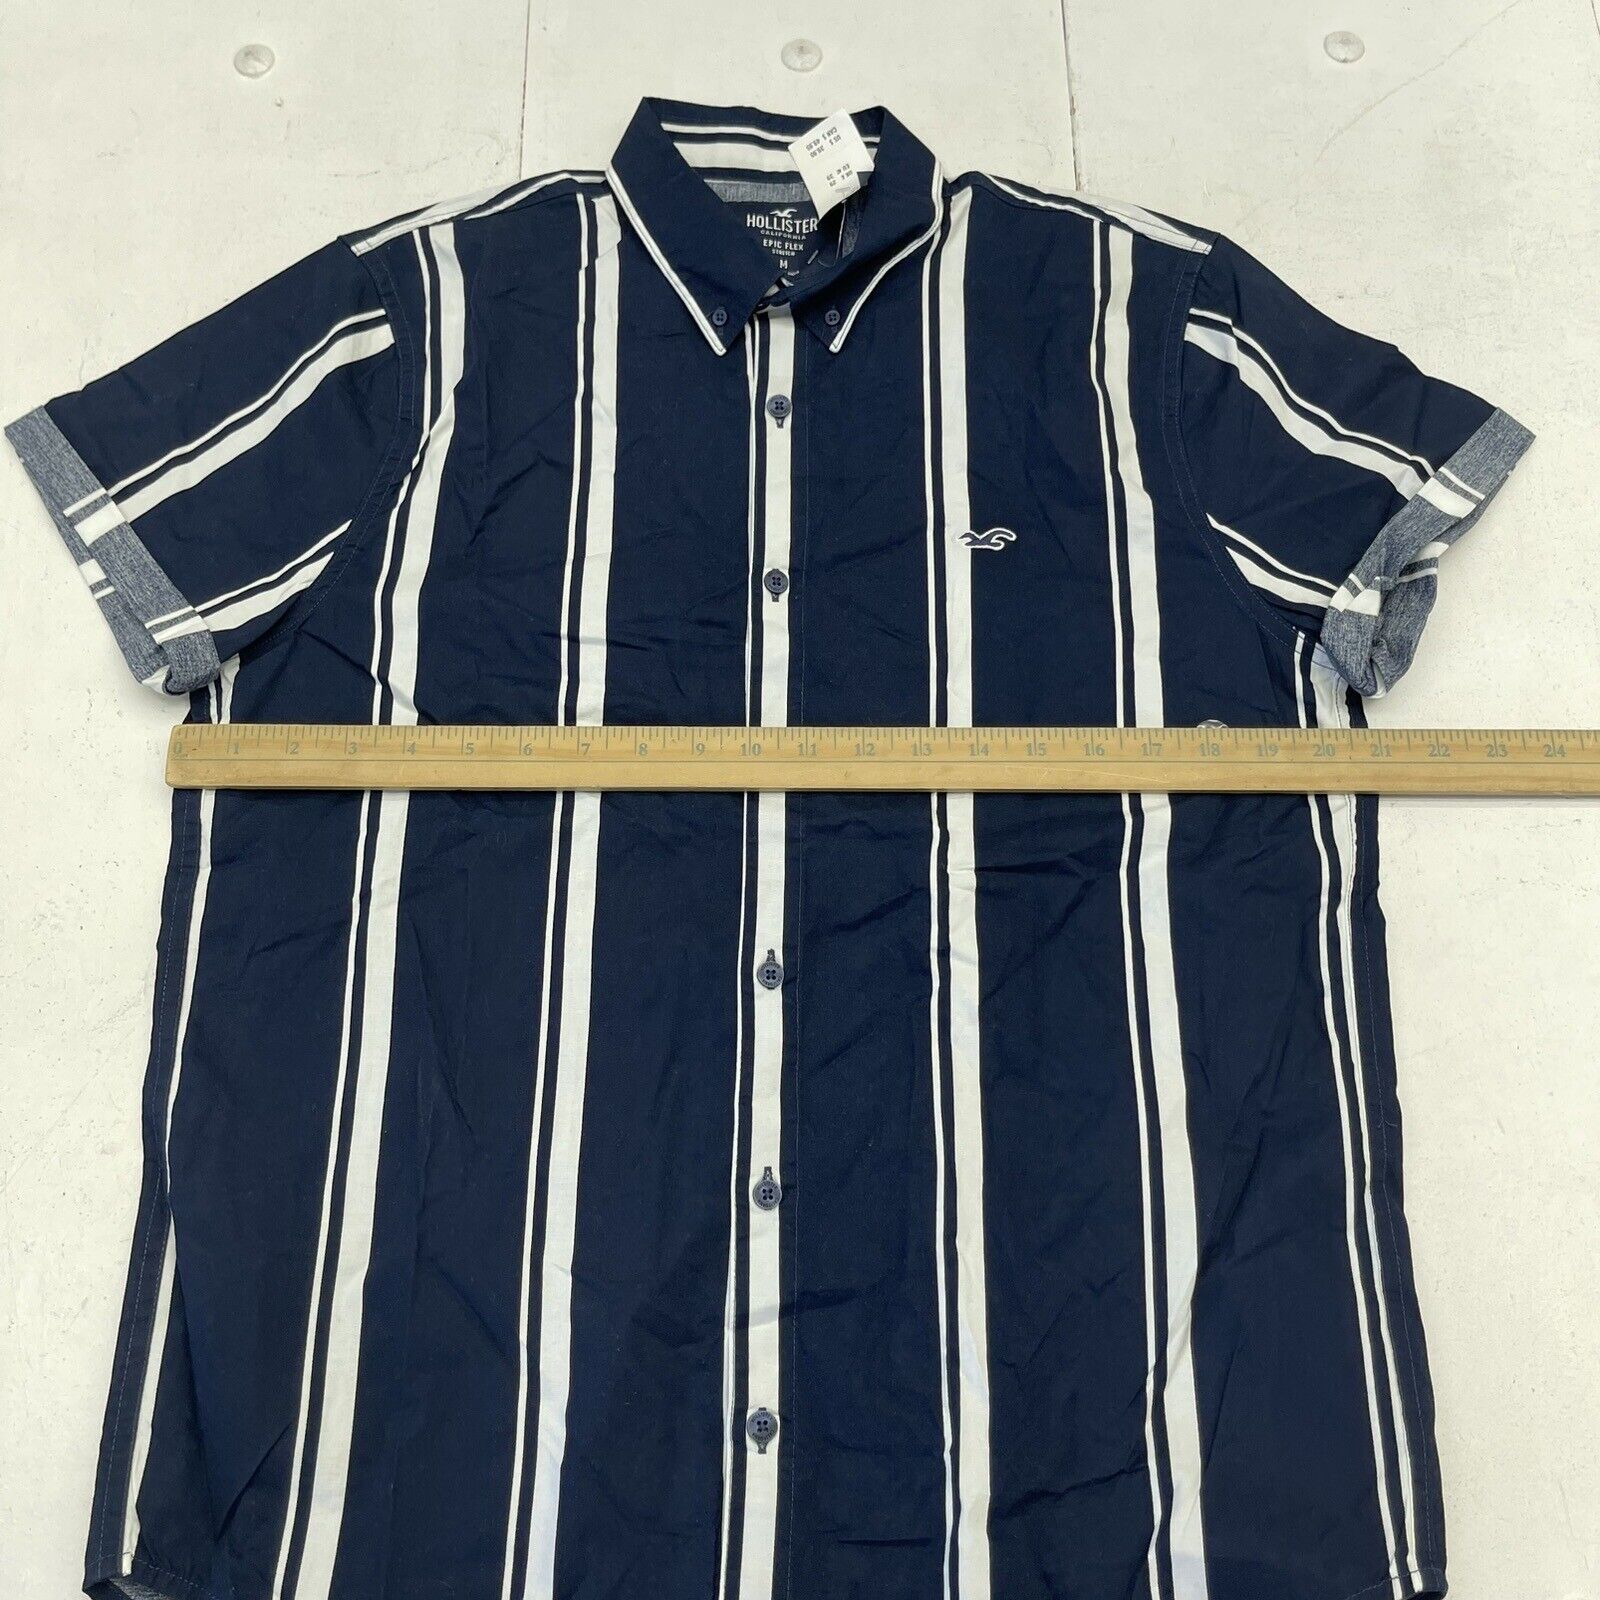 Hollister Mens Cotton Long Sleeve Button Up Blue White Striped